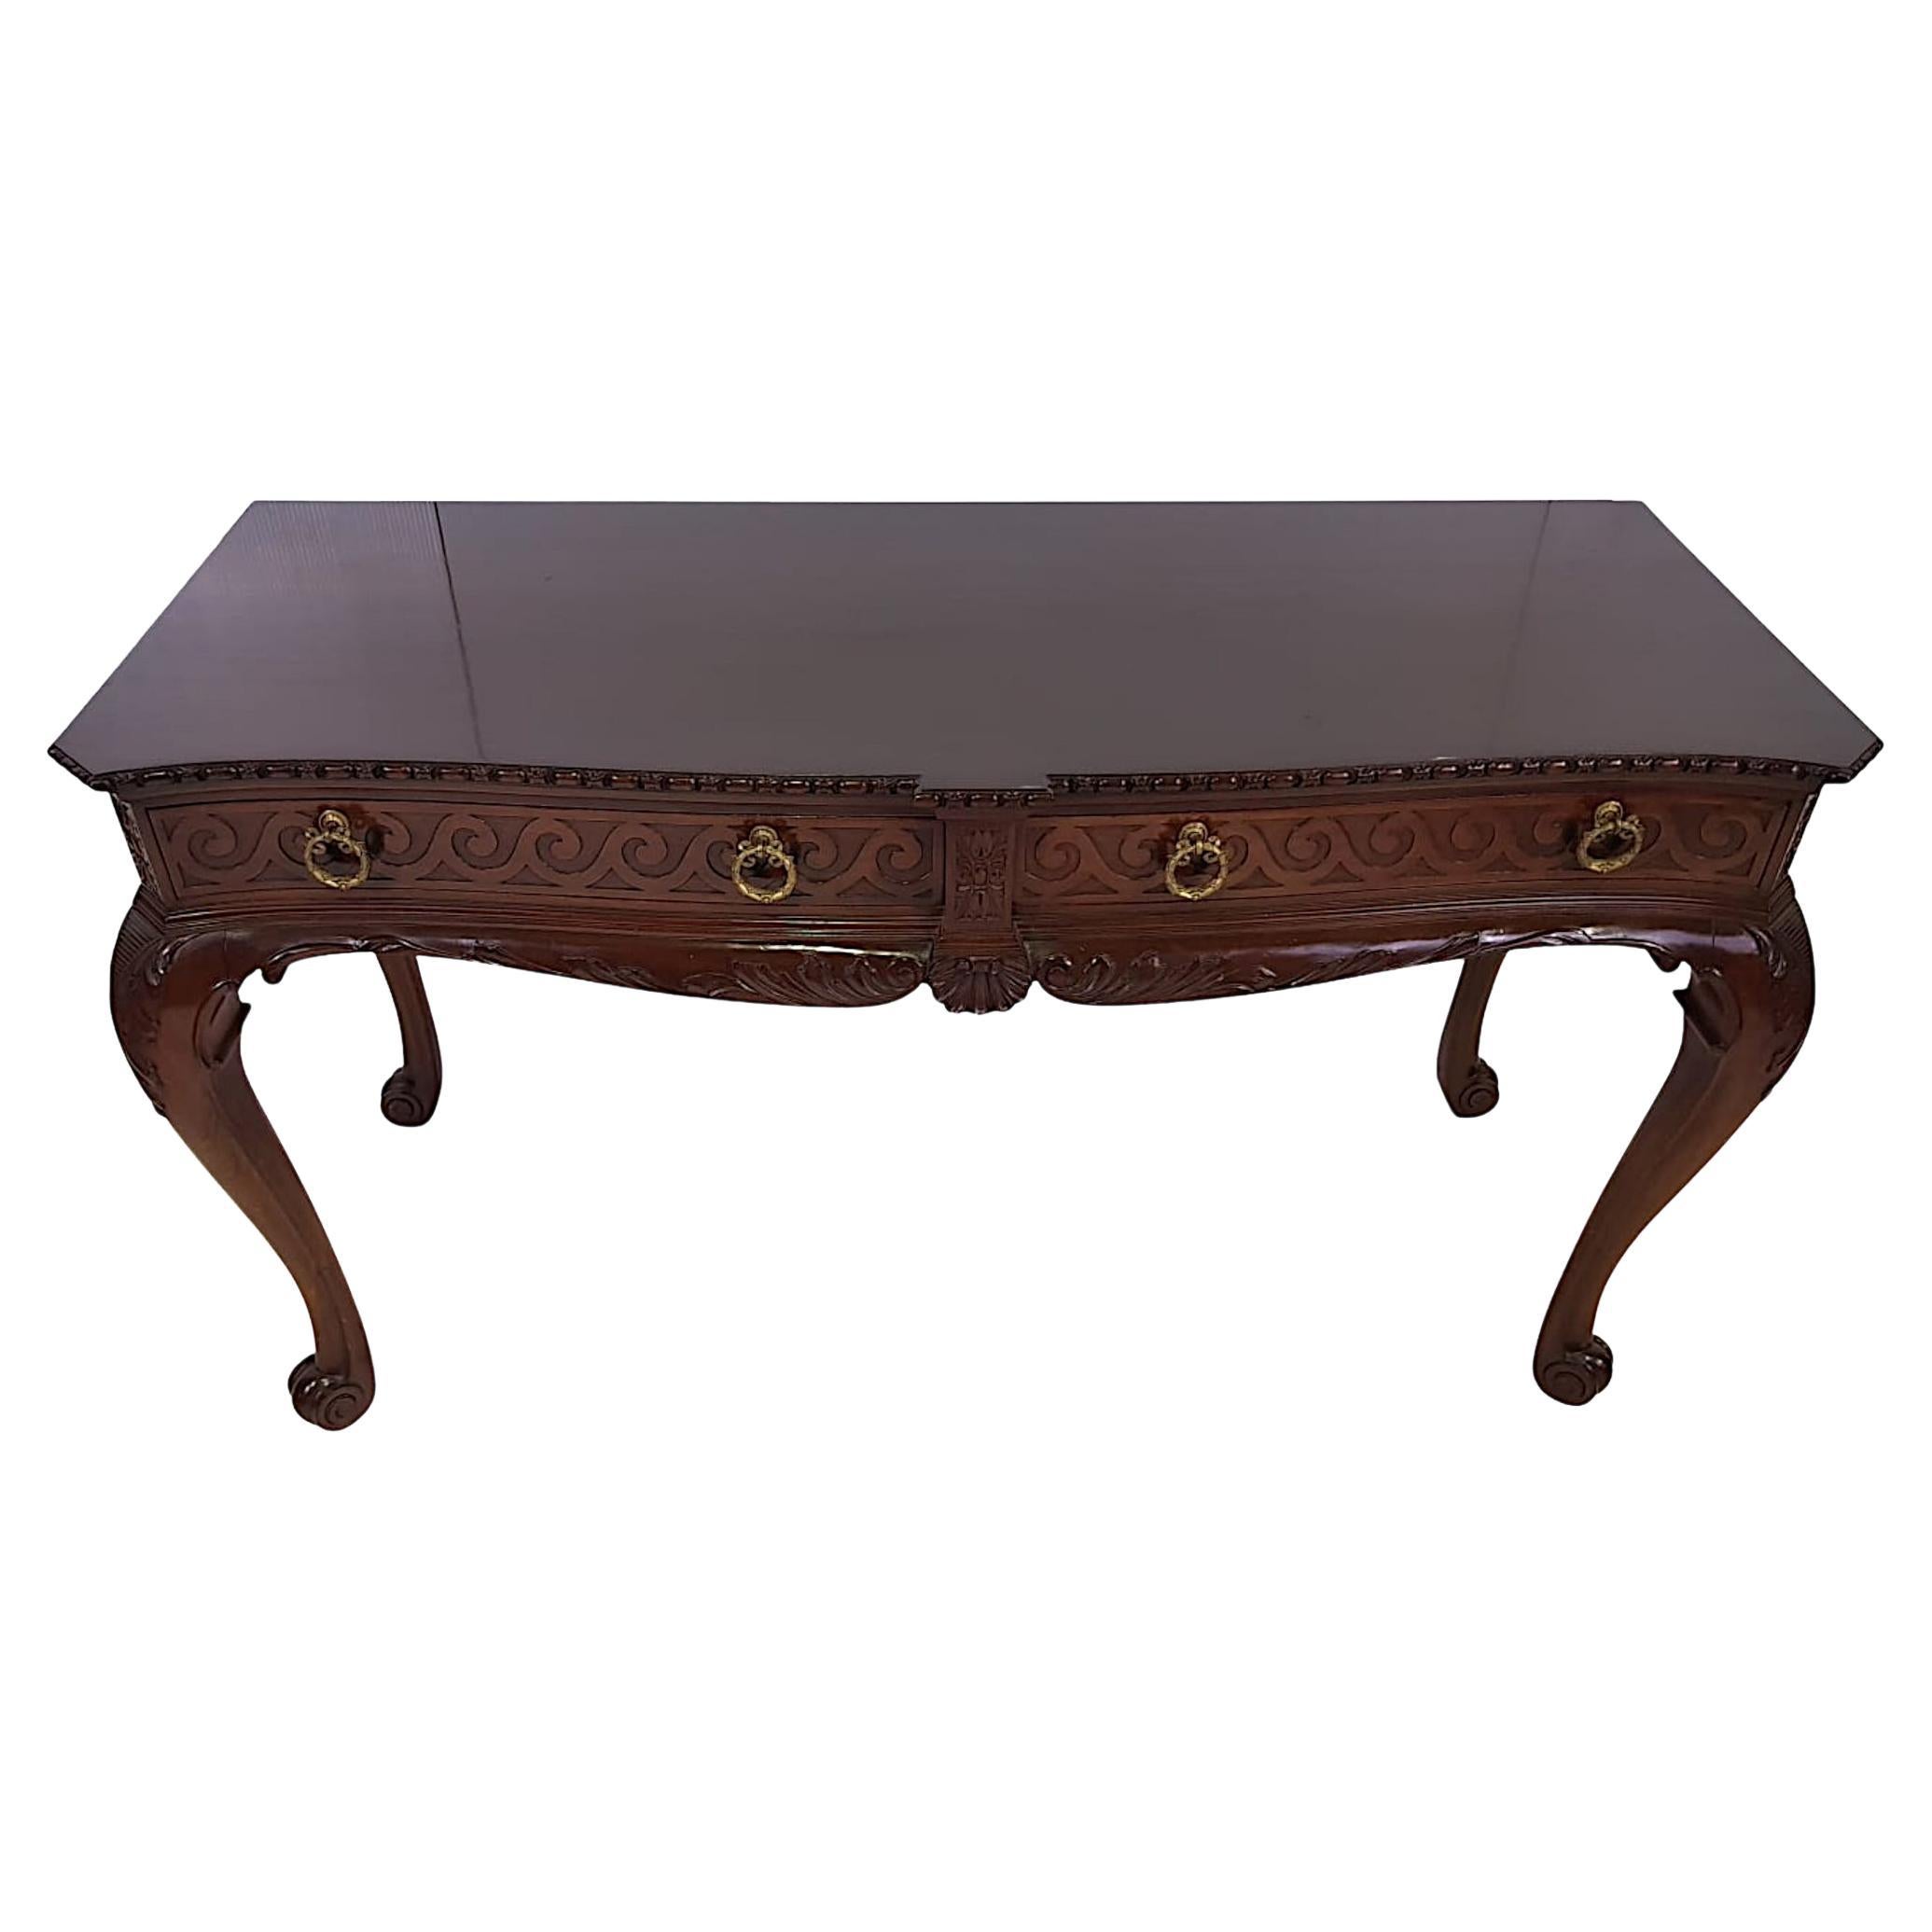 A lovely 19th Century Victorian mahogany console or hall table, the shaped moulded top of rectangular form with canted corners, lozenge and dart carving raised over frieze with two long drawers, decorative brass ring pulls and carved flower head